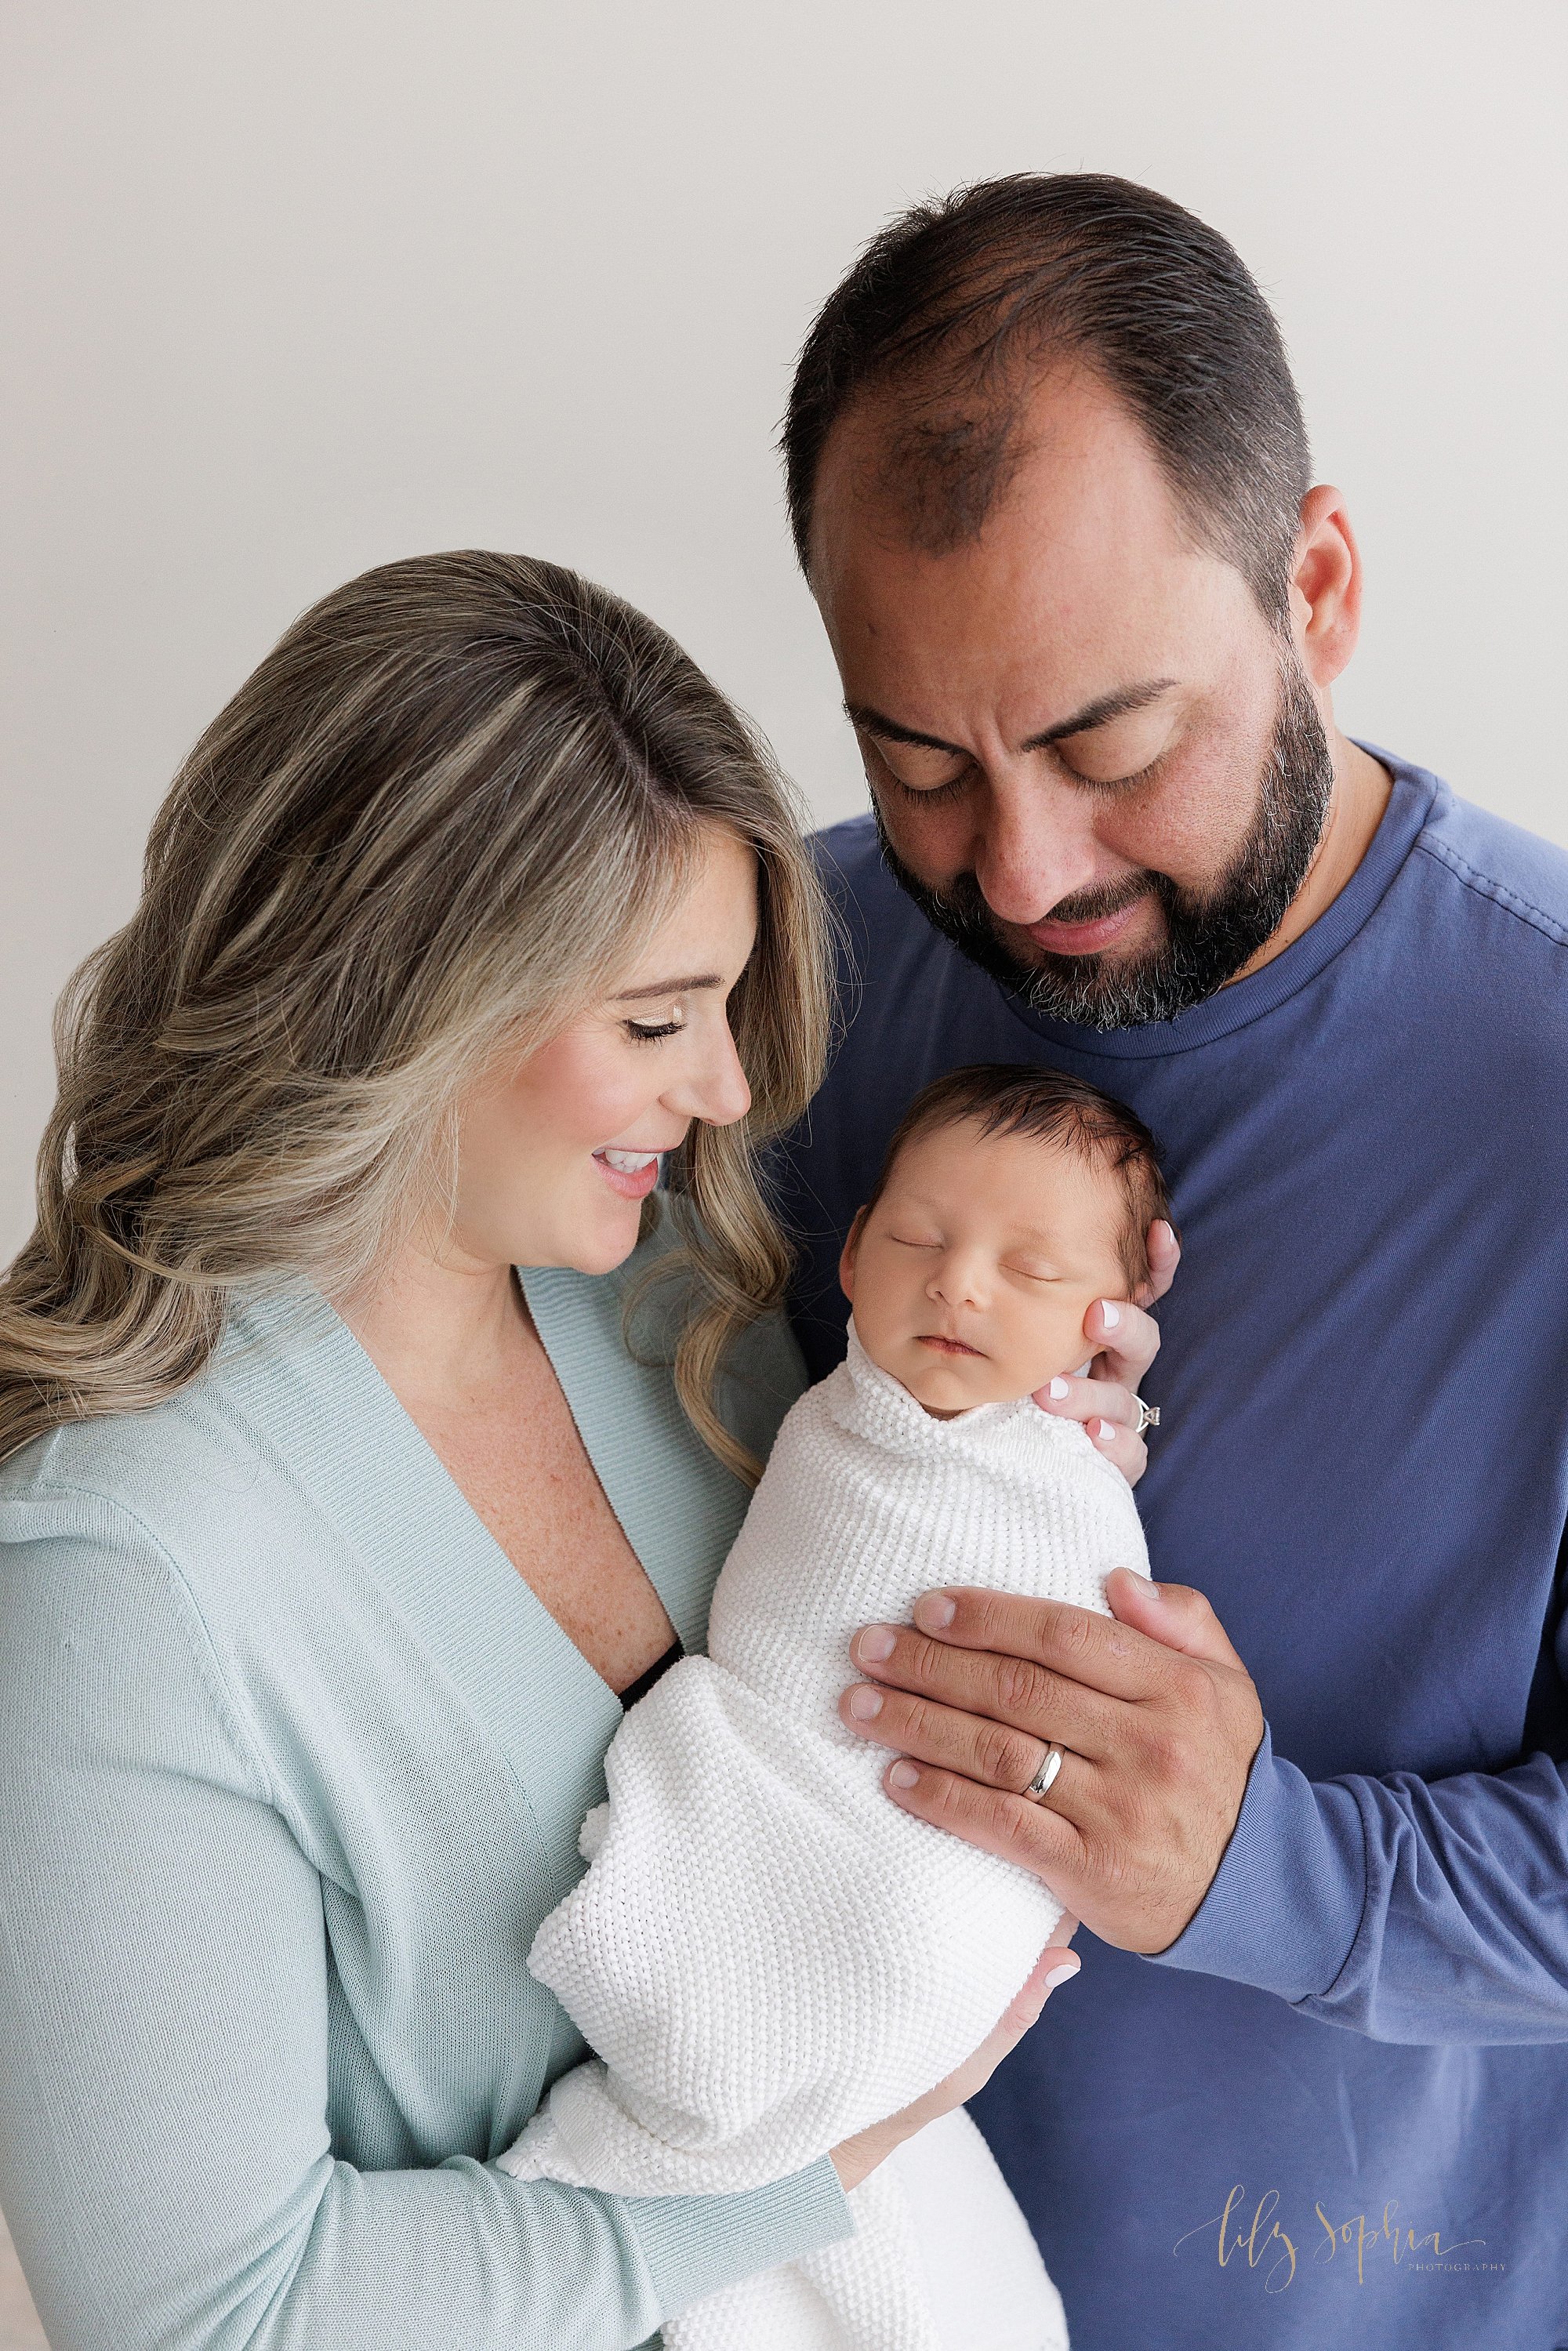  Newborn family portrait of a mother holding her peacefully sleeping newborn son in her arms as her husband stands next to her and places his left hand on his son and the parents admire him taken near Kirkwood in Atlanta in a natural light photograph